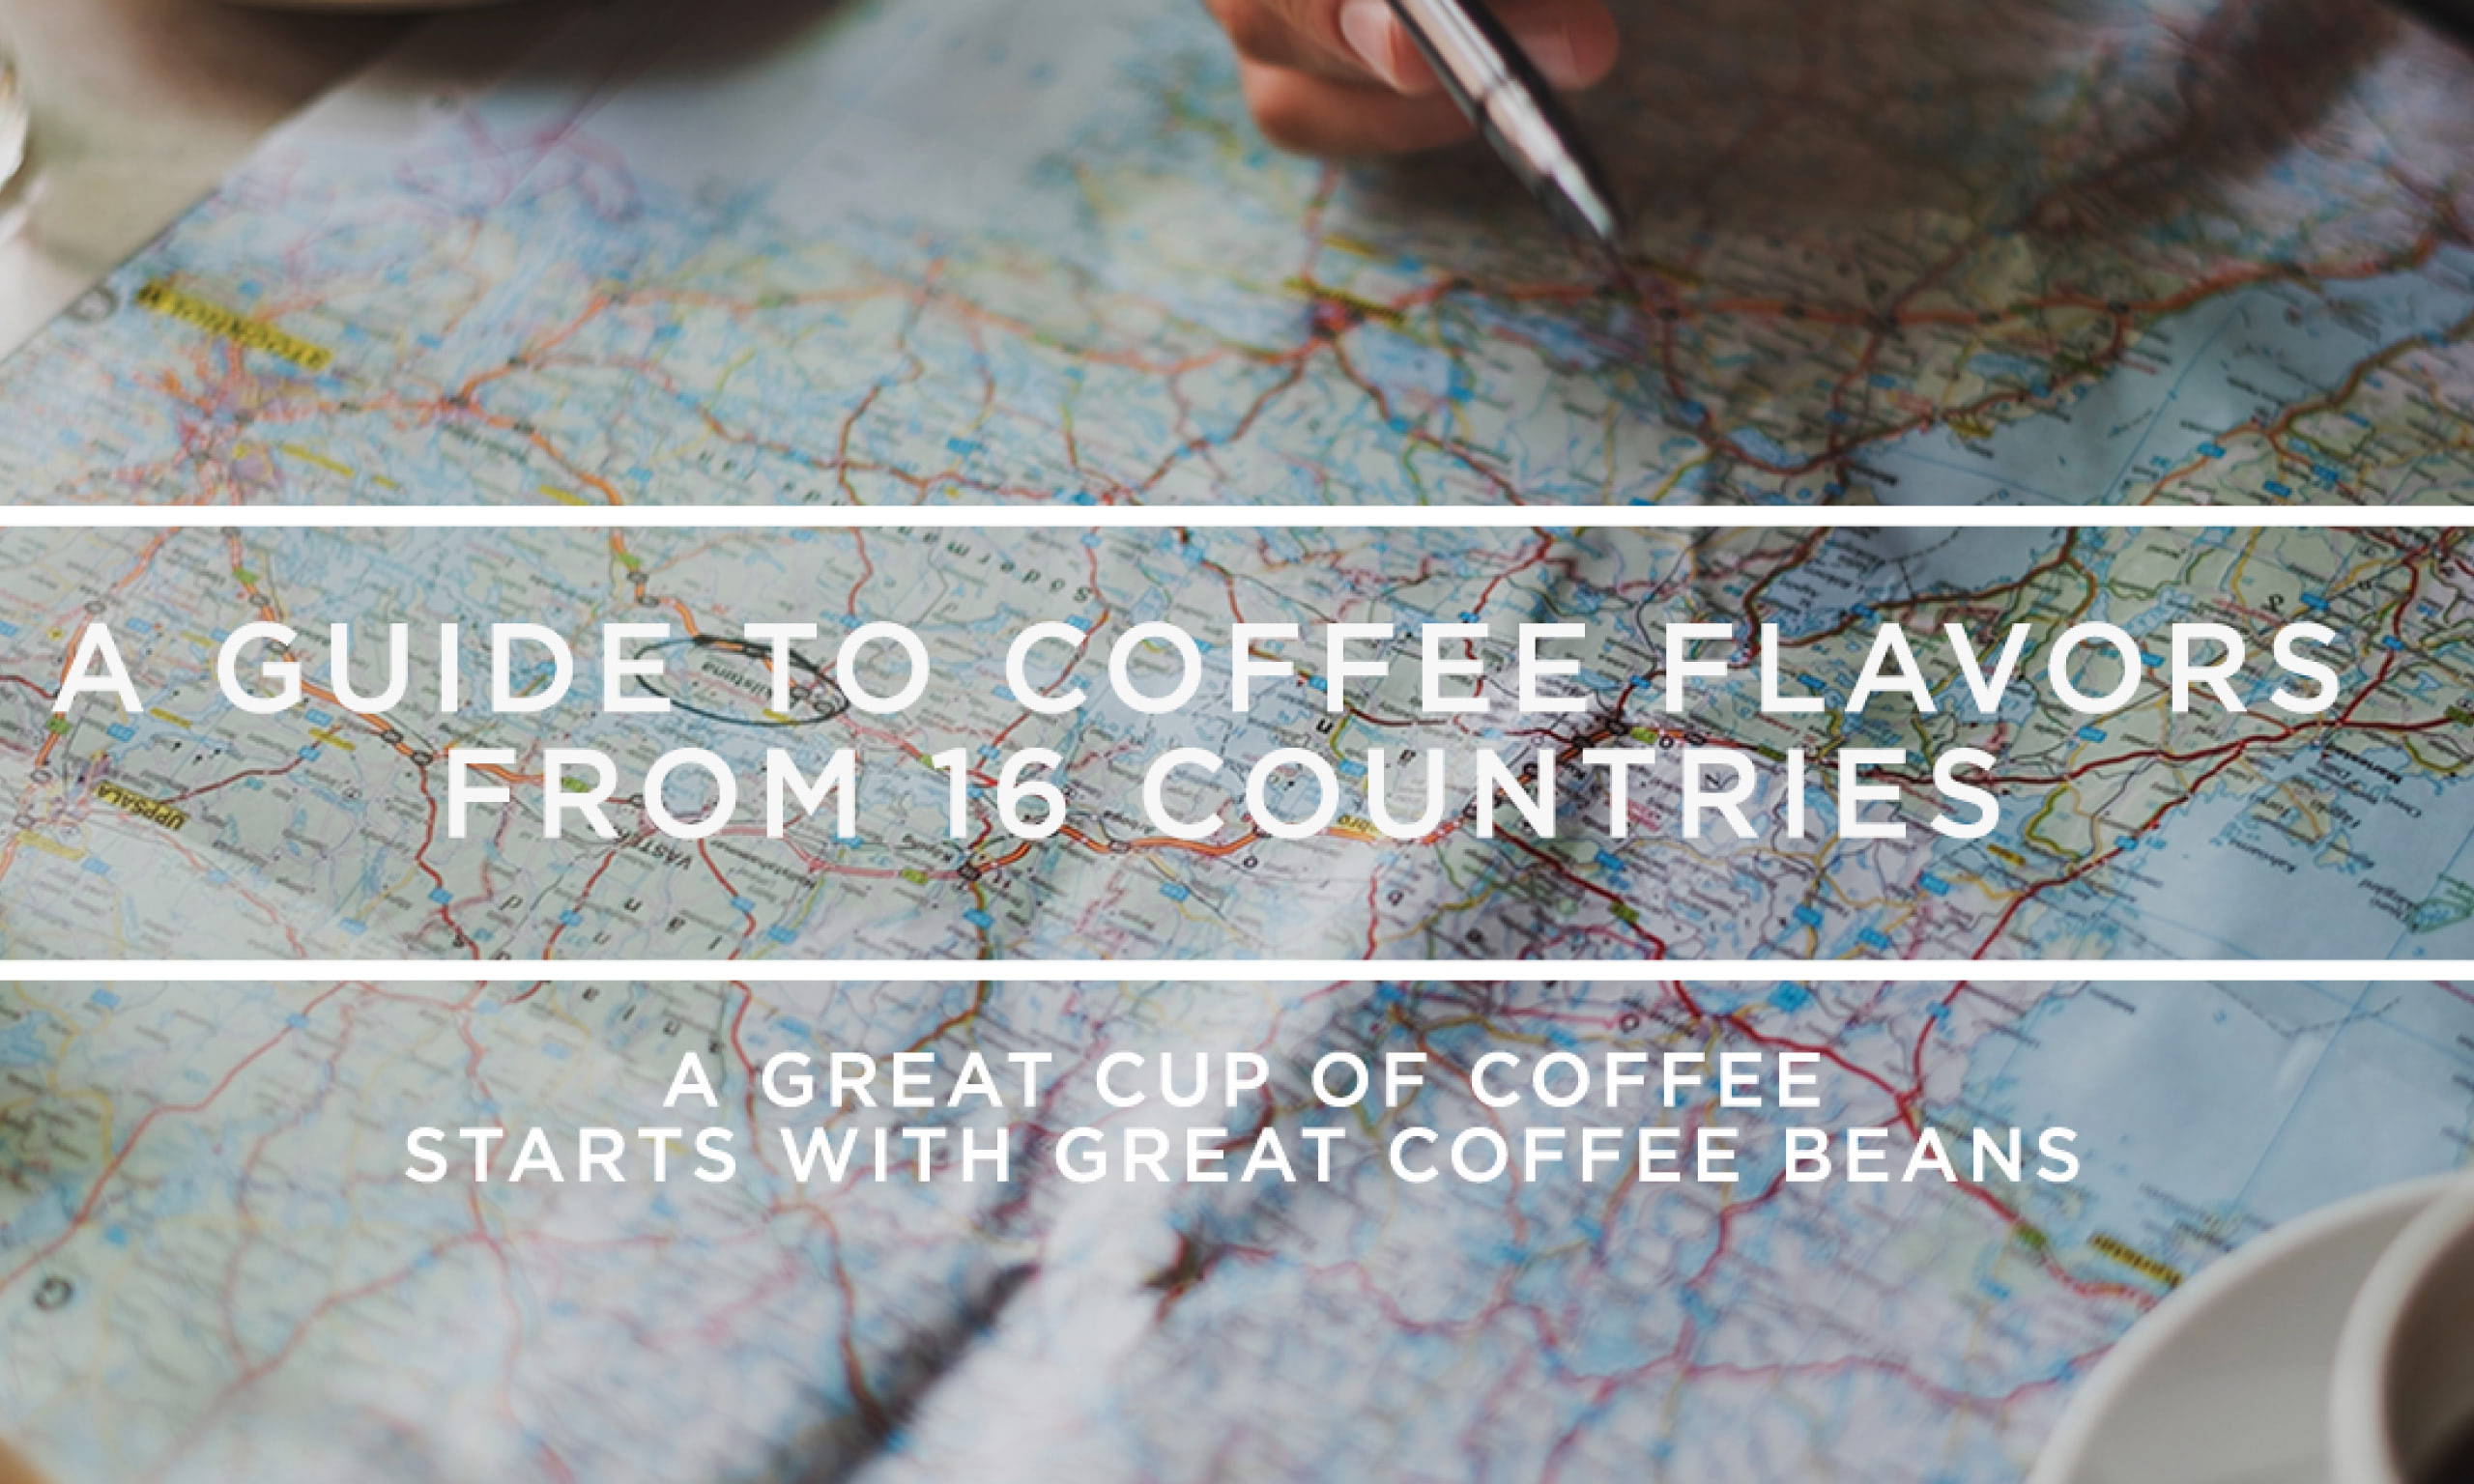 A Guide to Coffee Flavors from 16 Countries